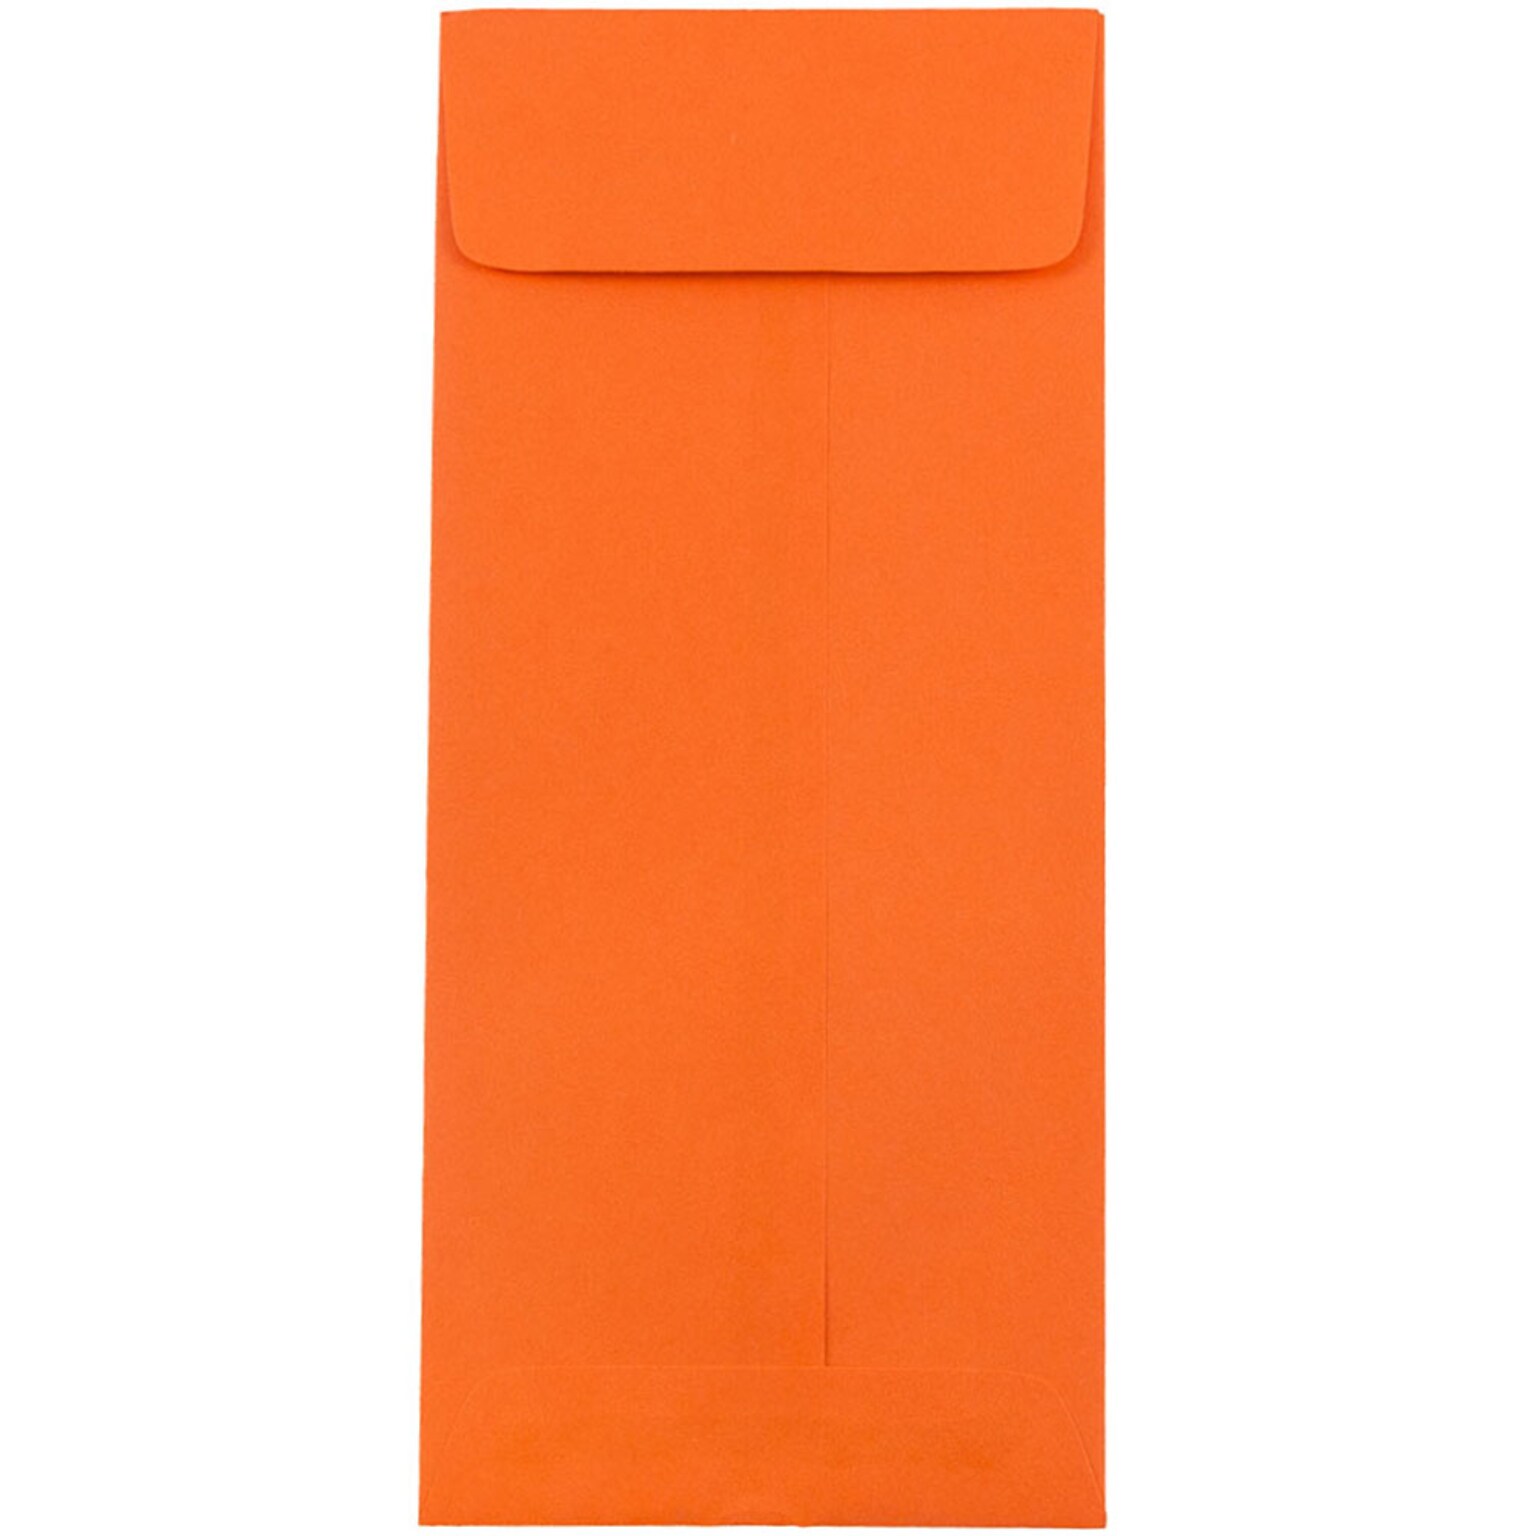 JAM Paper #10 Policy Business Colored Envelopes, 4 1/8 x 9 1/2, Orange Recycled, 25/Pack (15887)